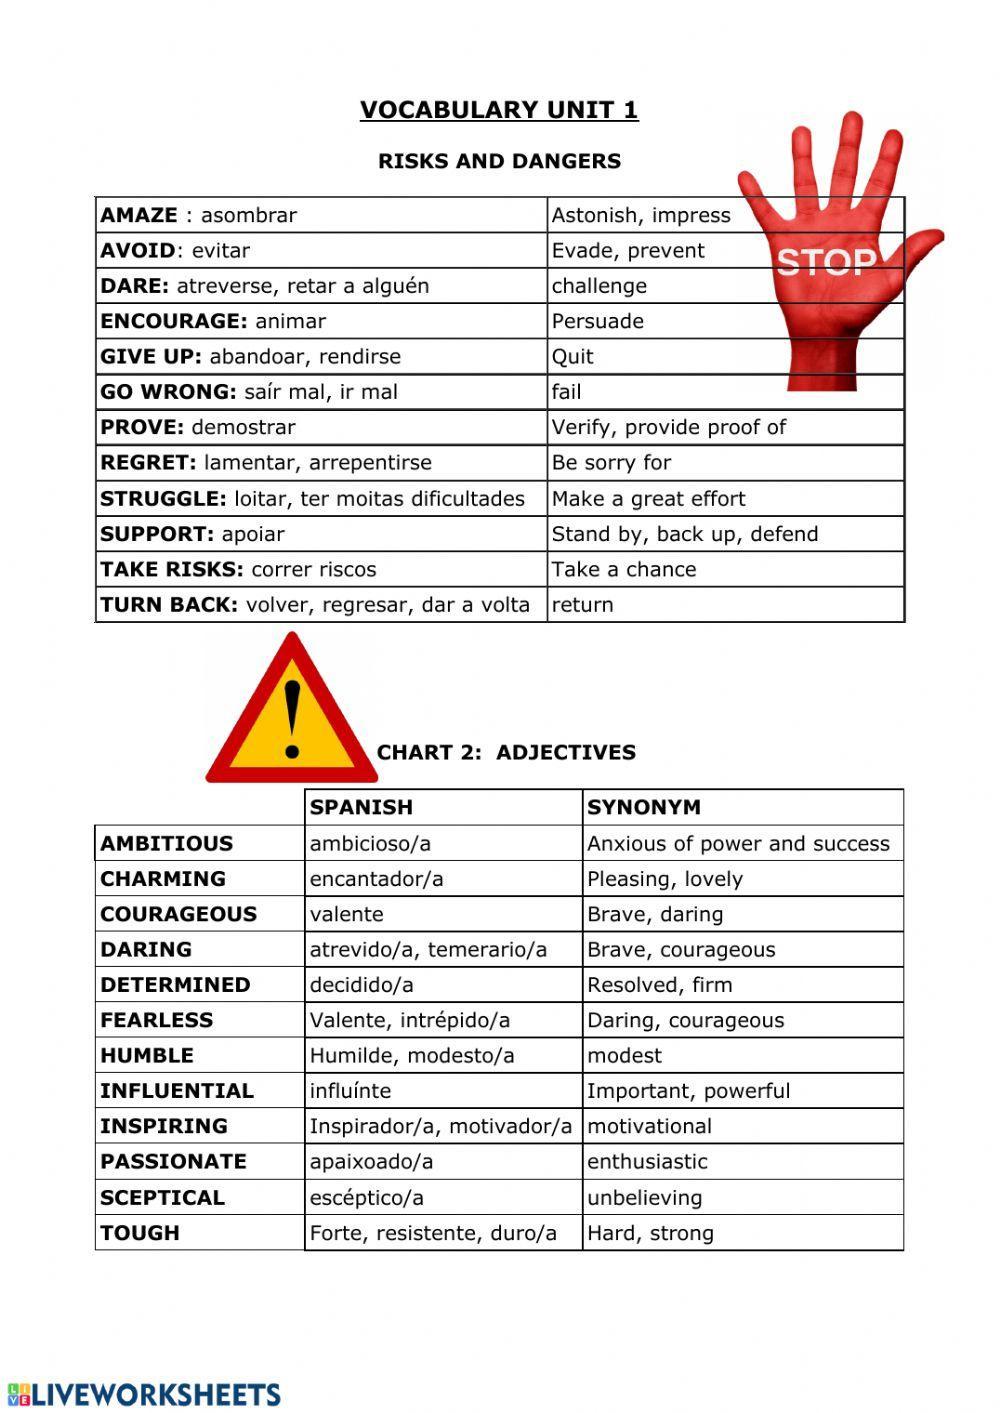 Risks and dangers vocabulary